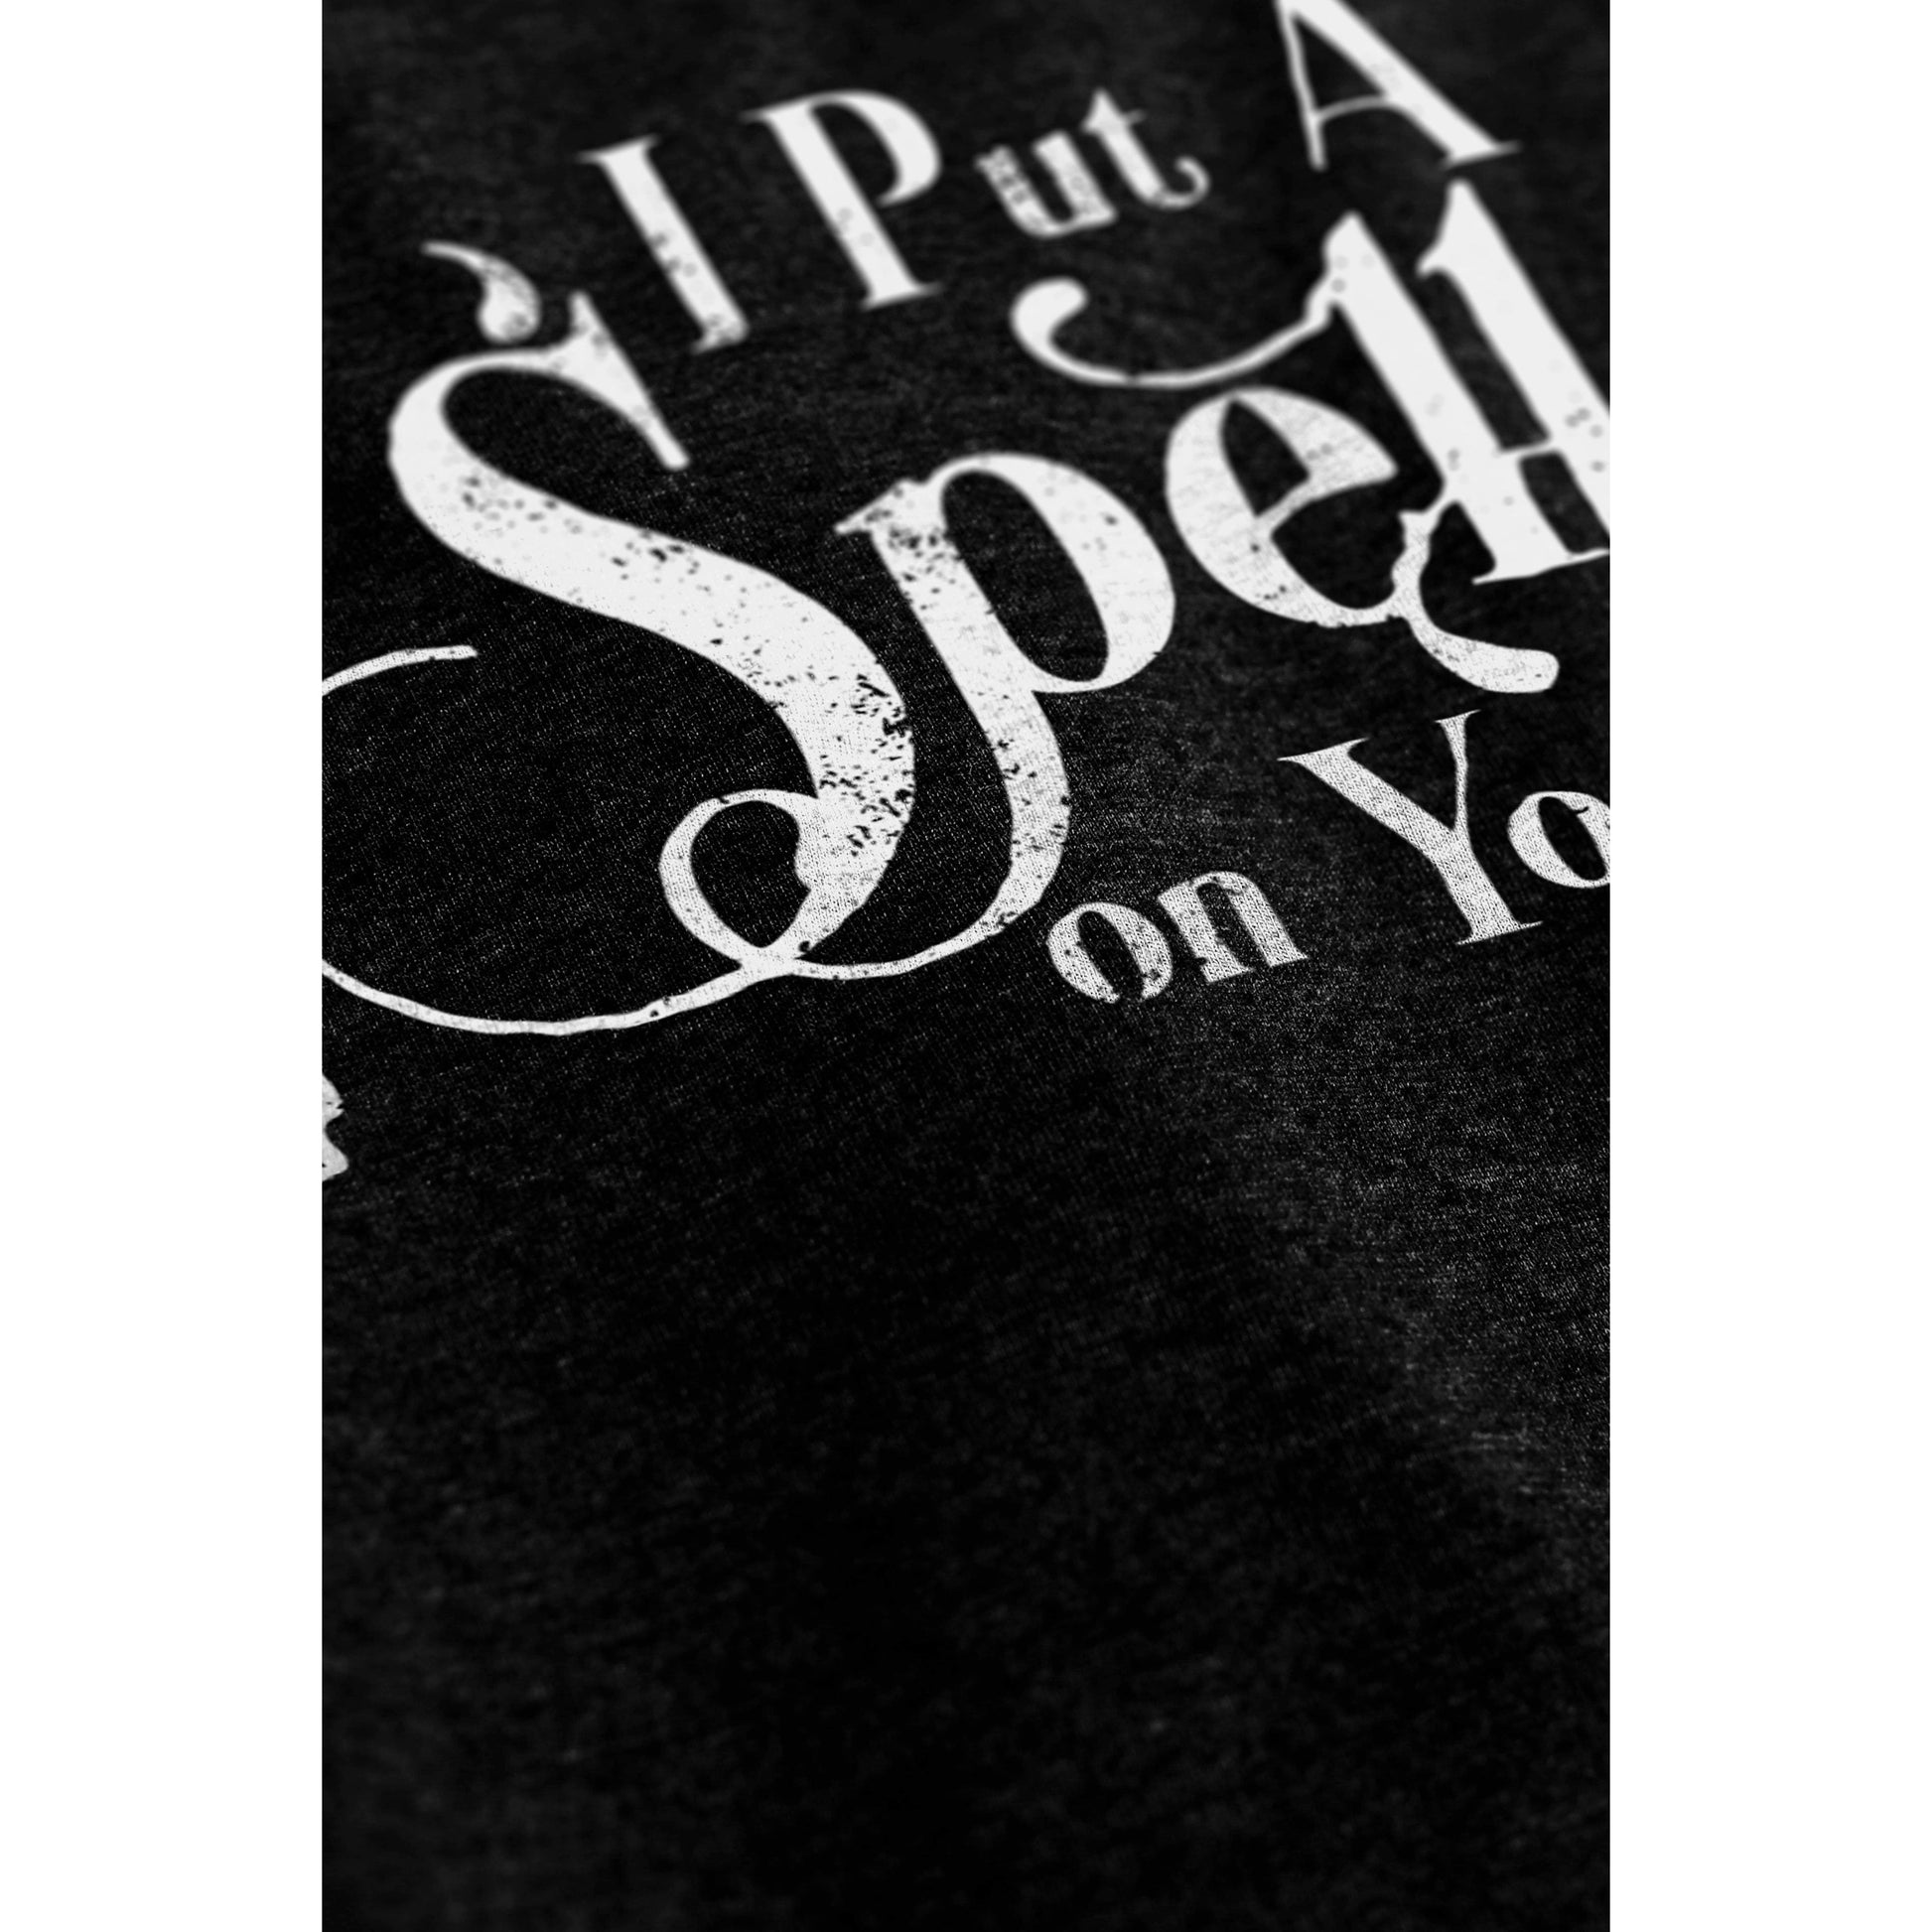 I Put A Spell On You - thread tank | Stories you can wear.